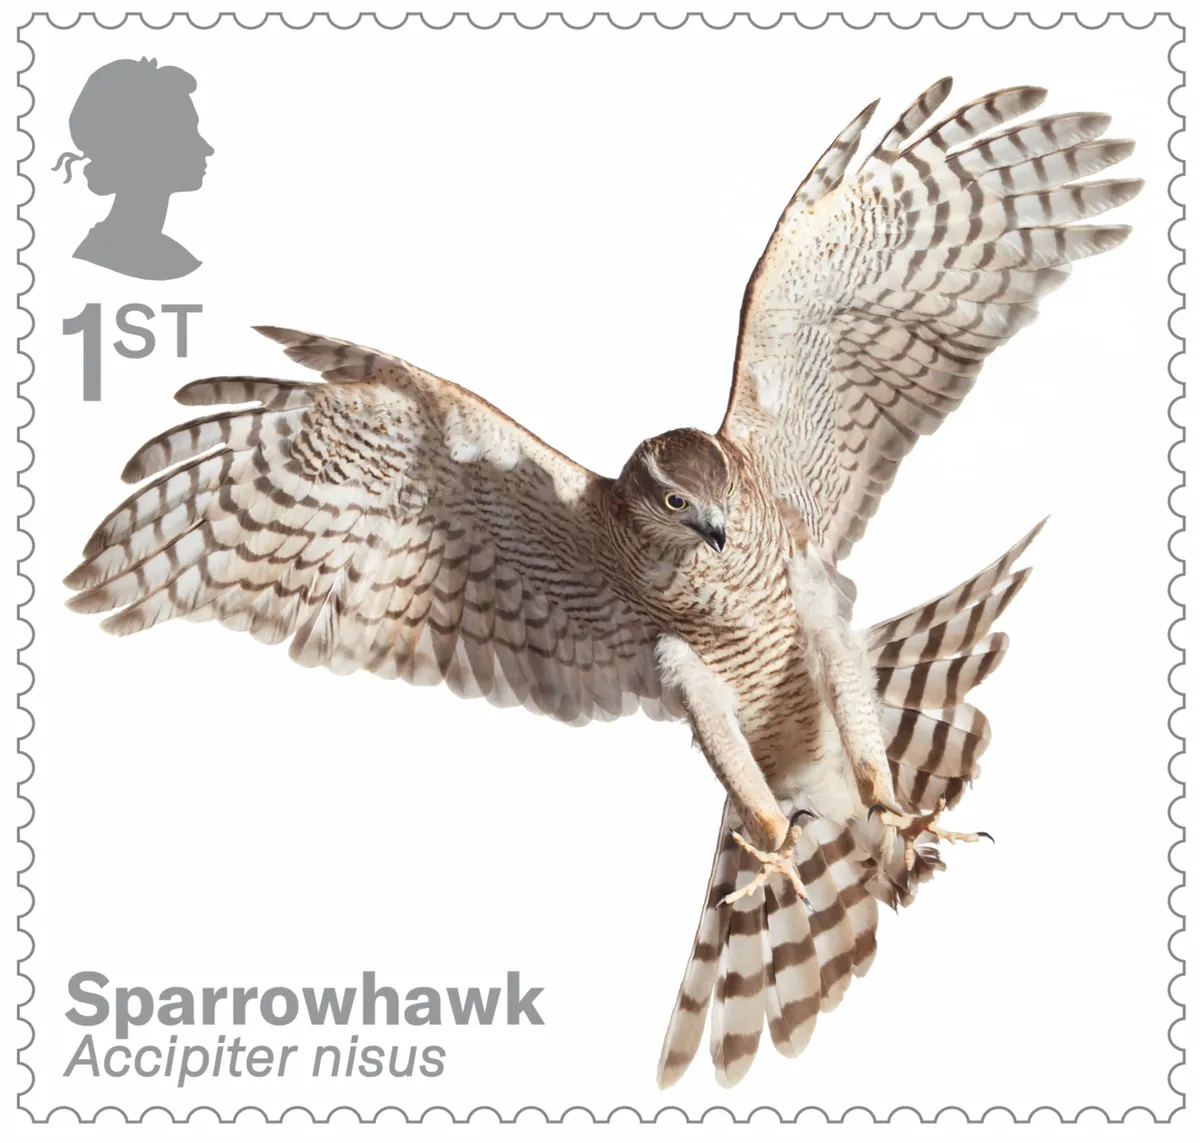 Bird of prey stamp collection - sparrowhawk. © Tim Flach/Royal Mail.